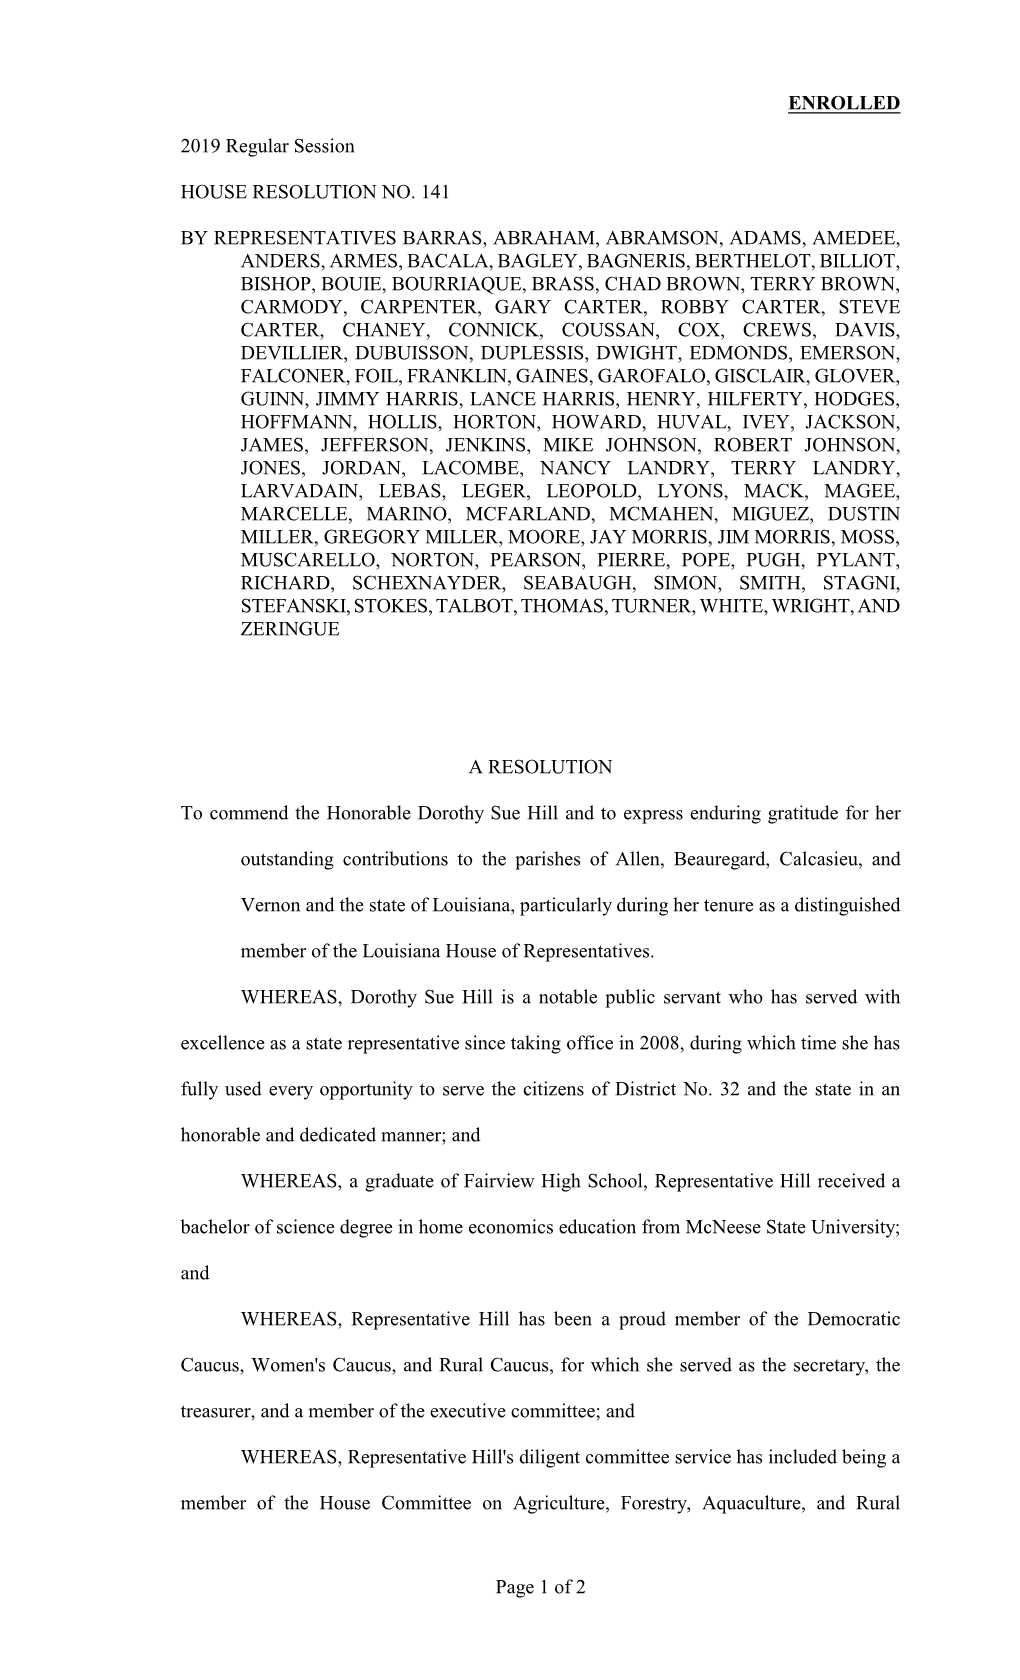 ENROLLED 2019 Regular Session HOUSE RESOLUTION NO. 141 by REPRESENTATIVES BARRAS, ABRAHAM, ABRAMSON, ADAMS, AMEDEE, ANDERS, ARME